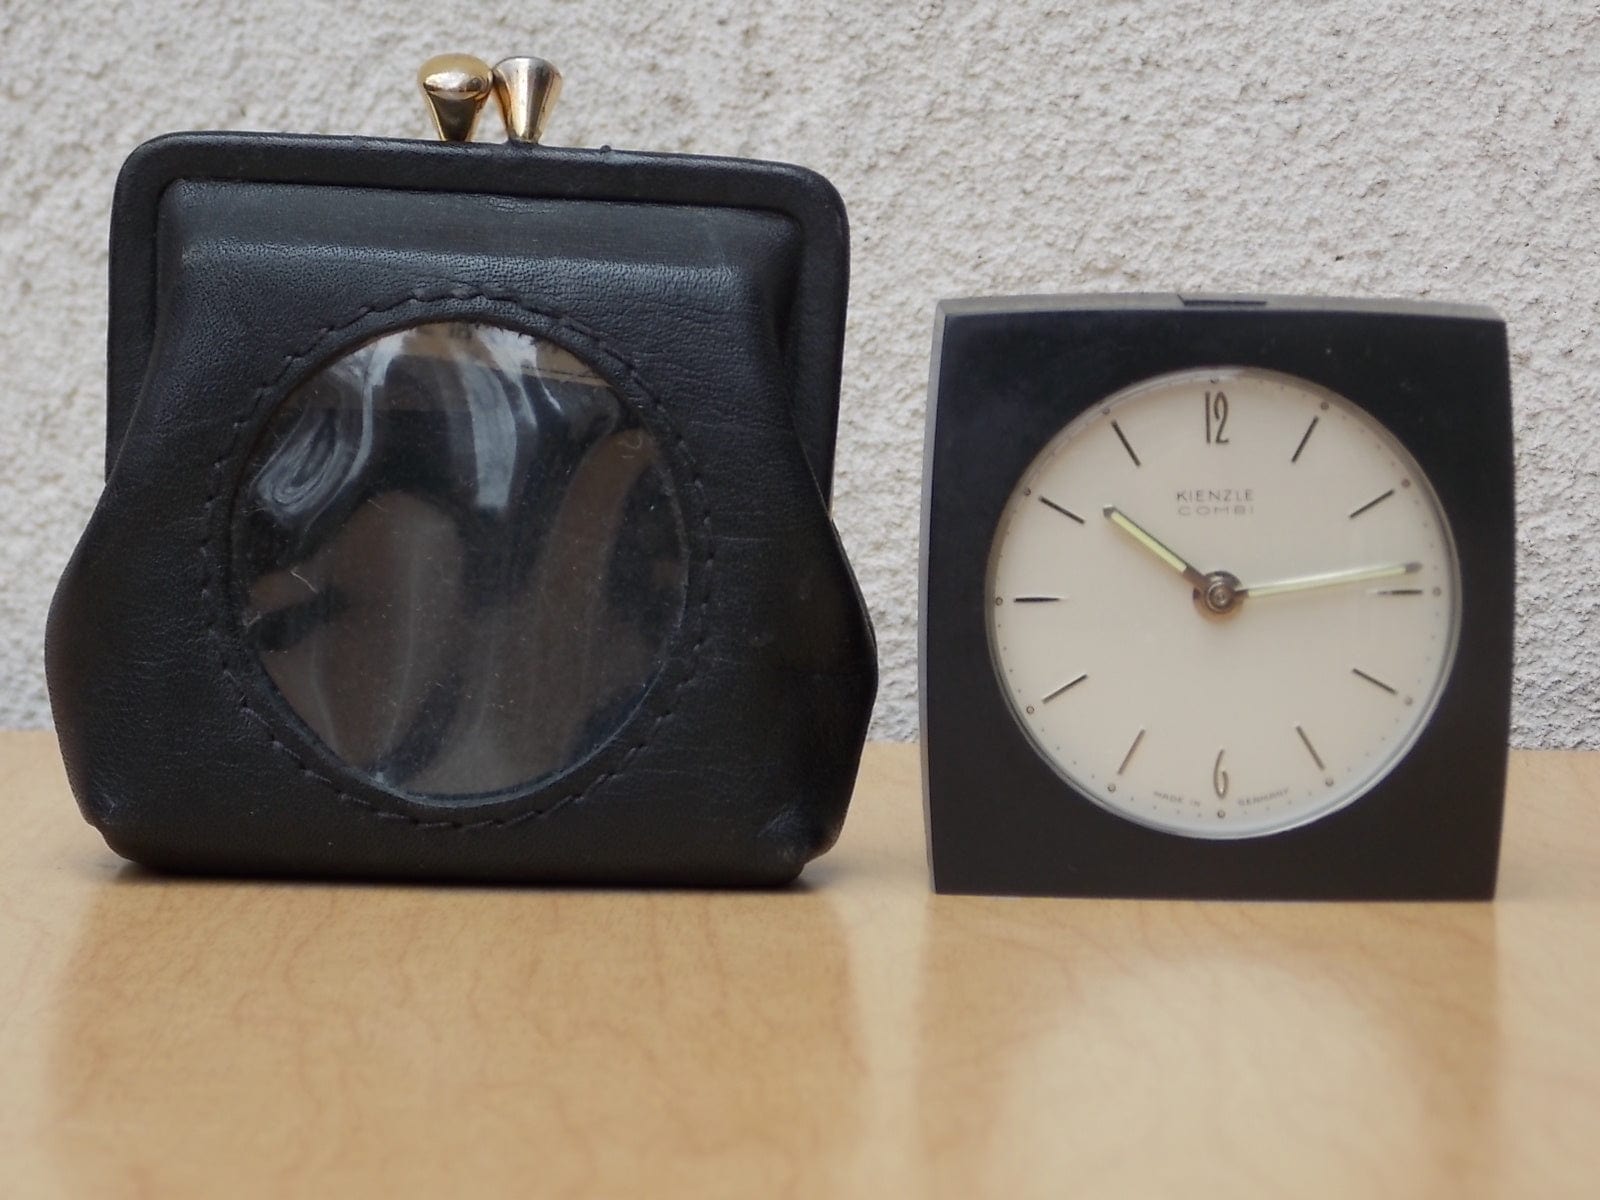 I Like Mike's Mid Century Modern Clock Kenzle Combi Travel Clock in Mini Coin Purse, Lord & Taylor